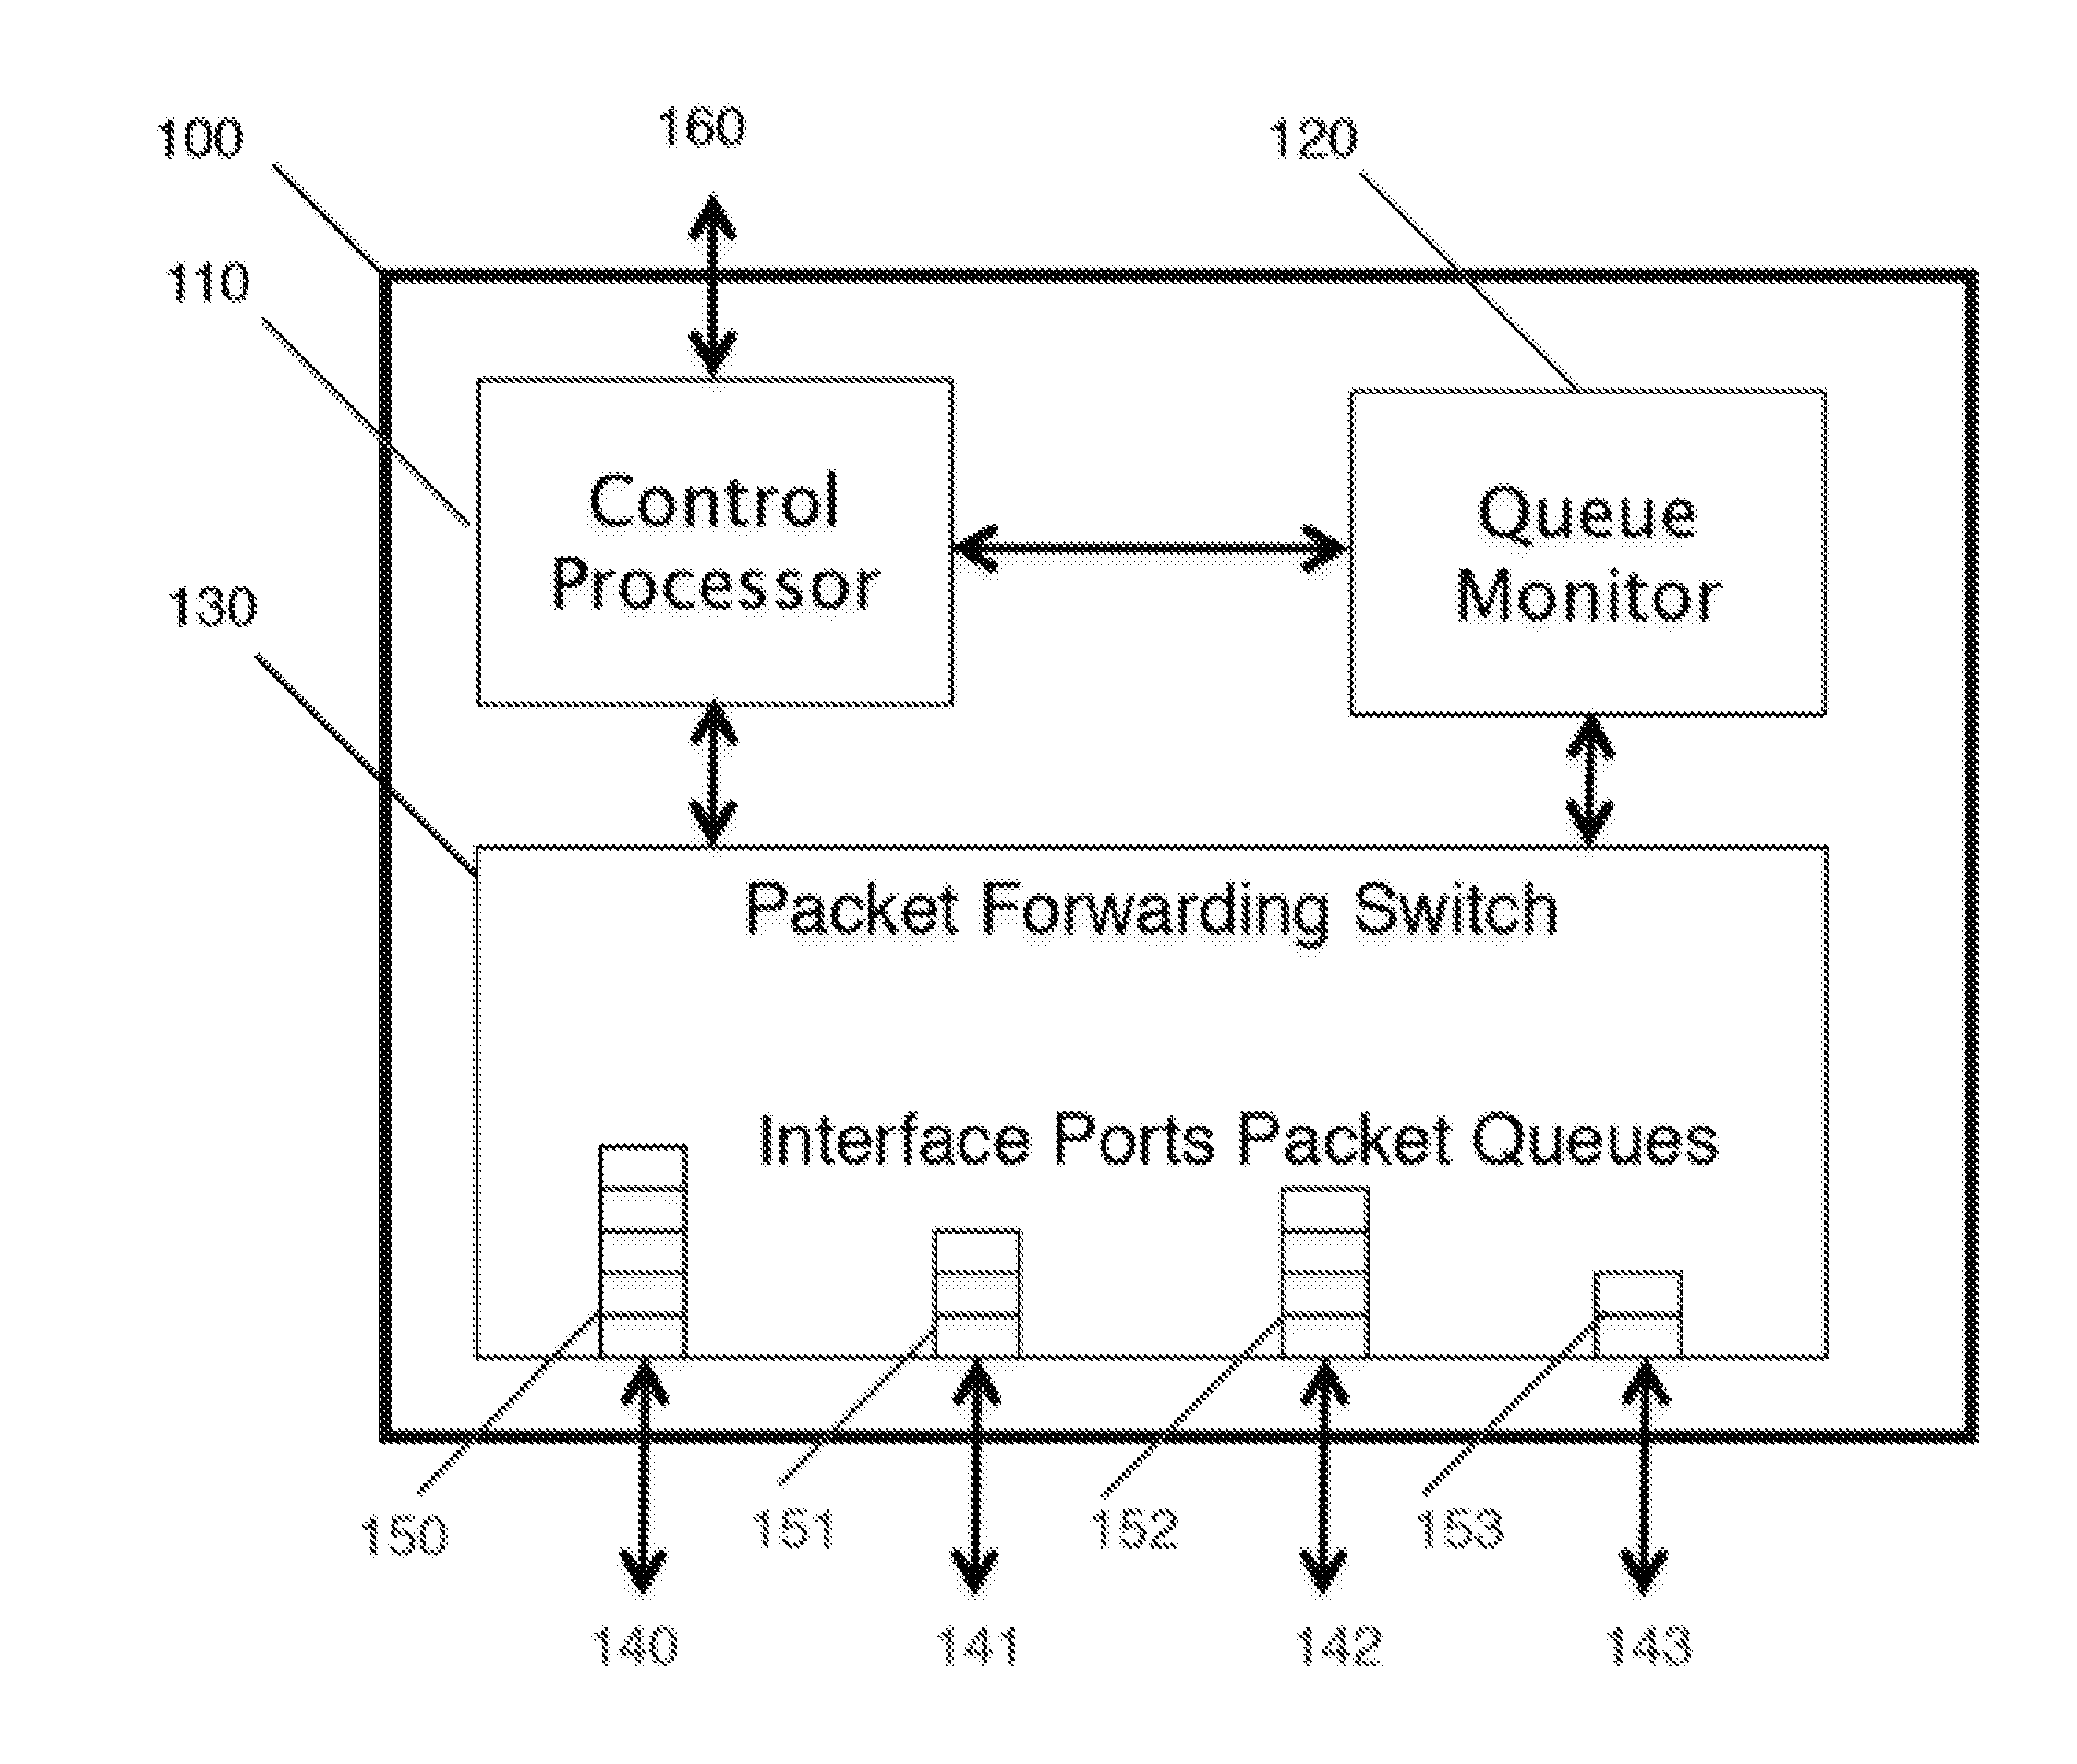 Latency Analysis of Traffic Passing Through an Ethernet Switch